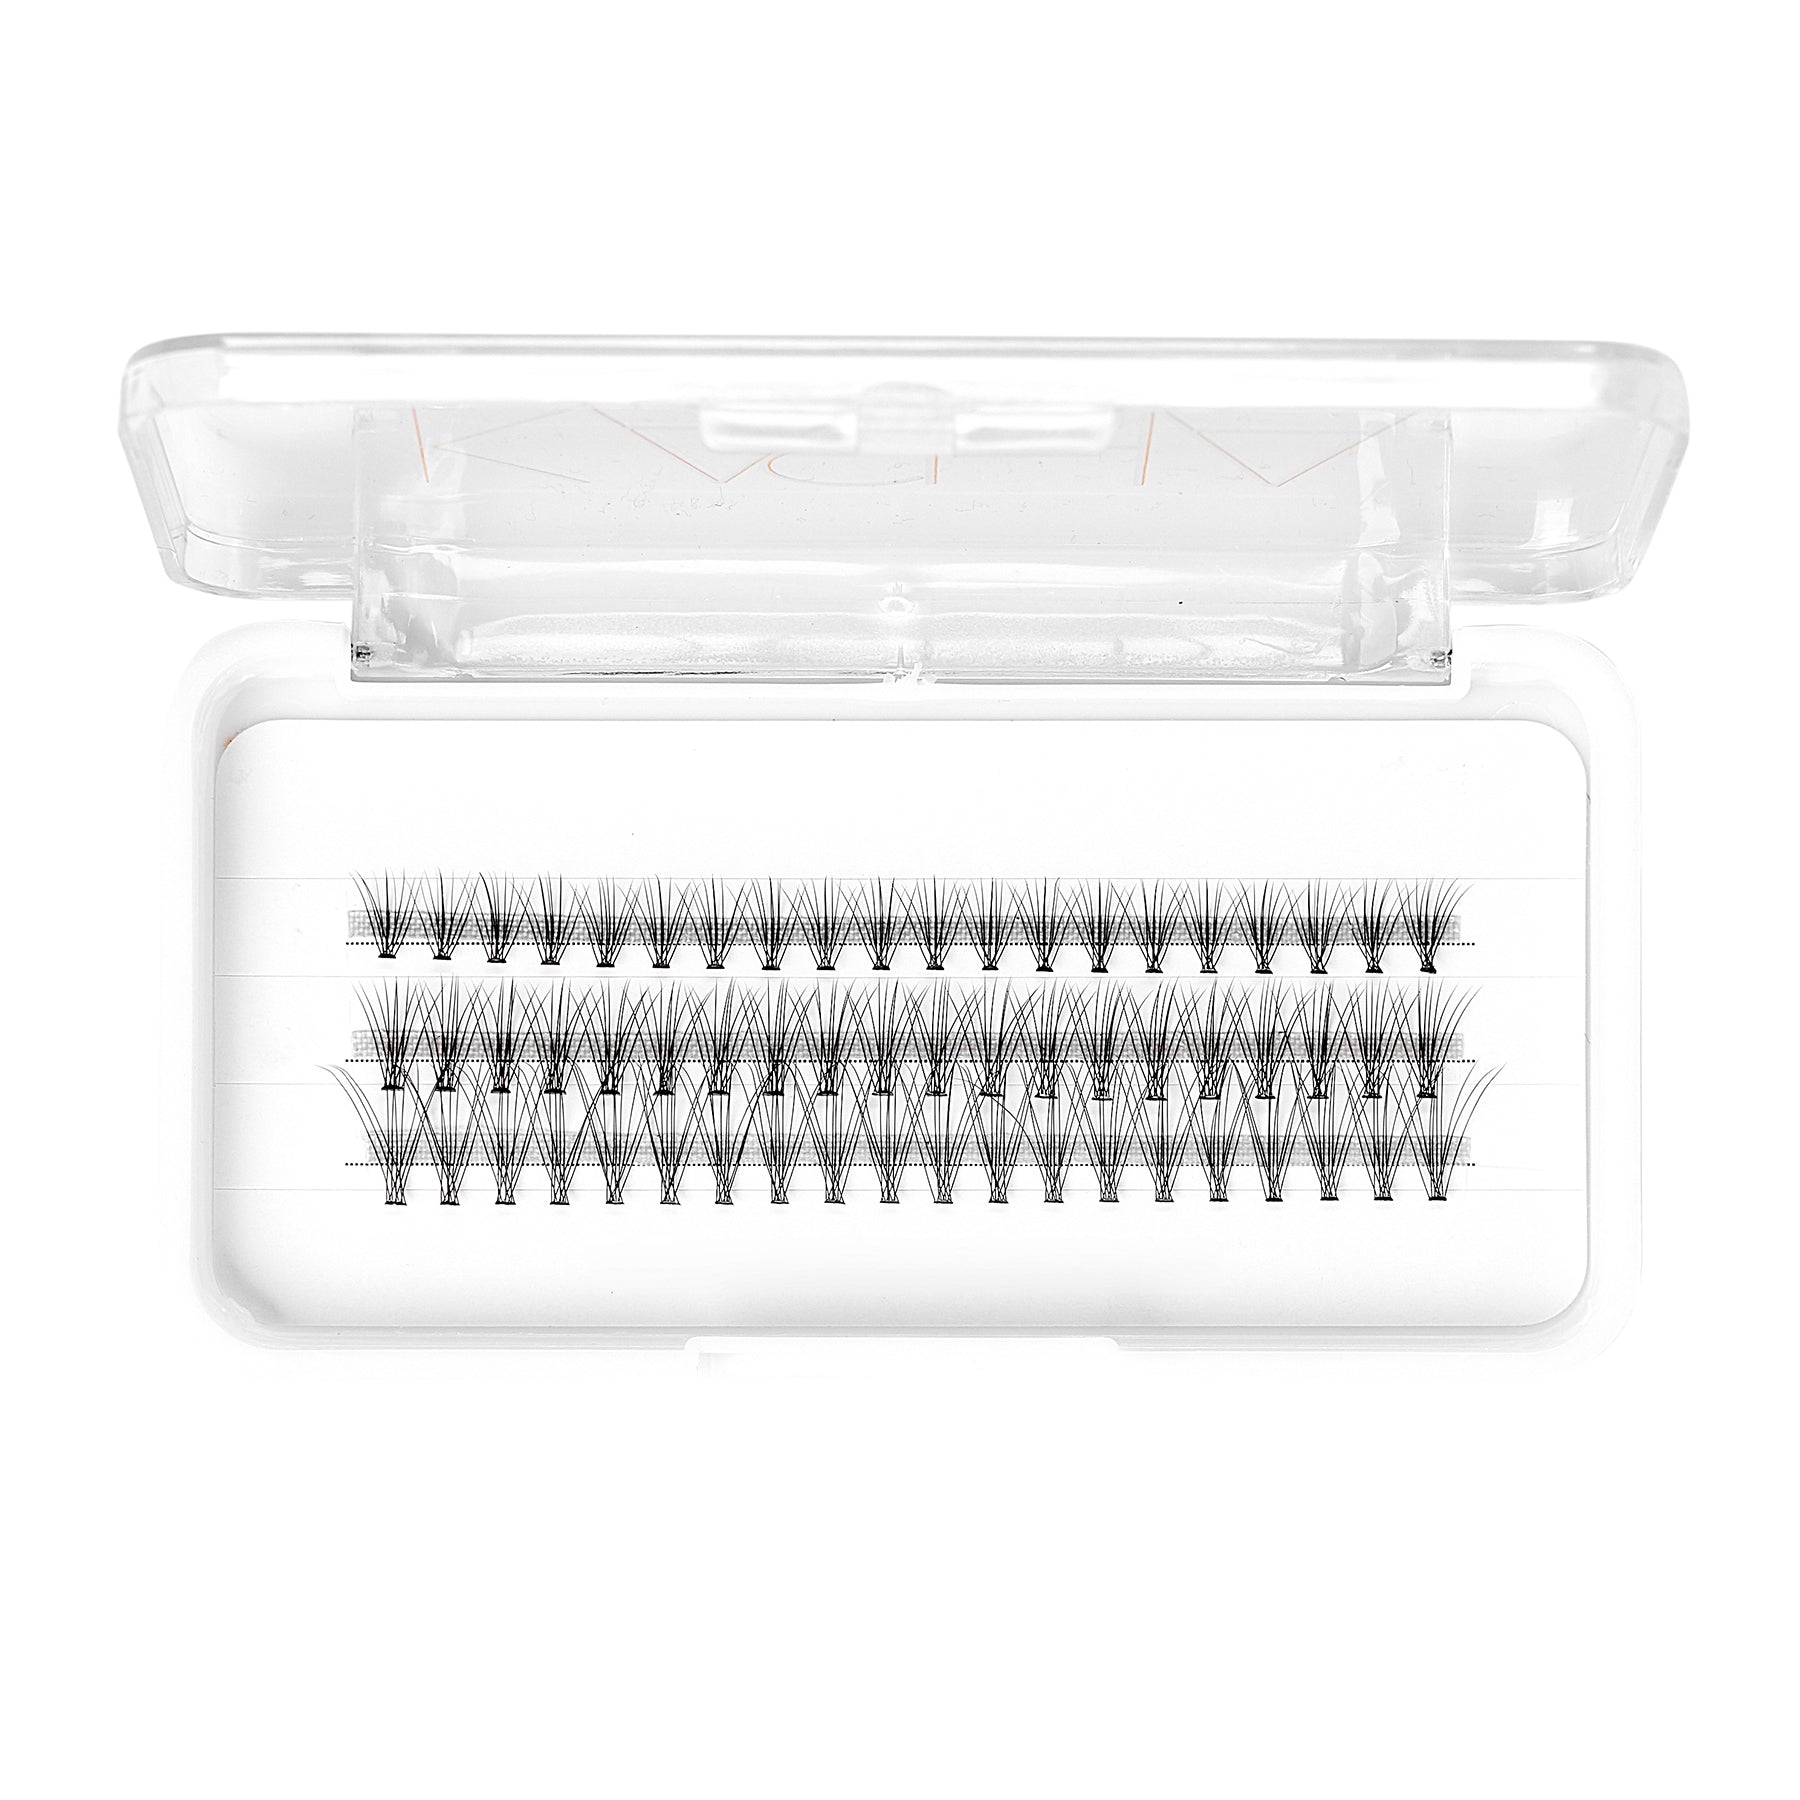 A pair of individual false eyelashes in different lengths presented in a plastic case